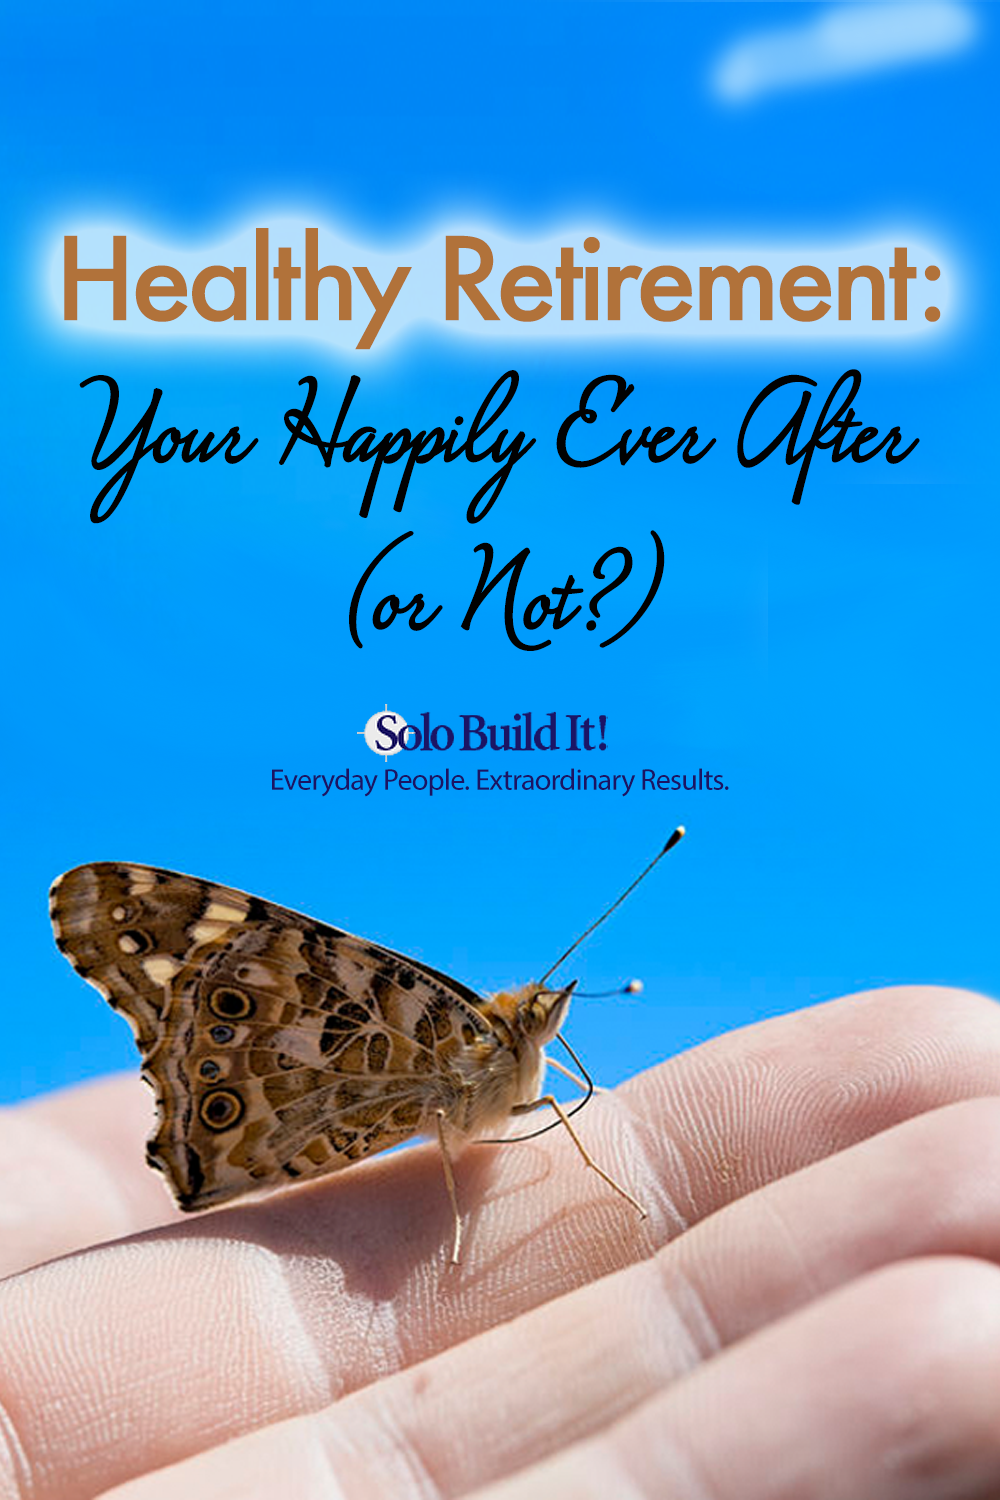 Healthy Retirement: How to Live Happily Ever After